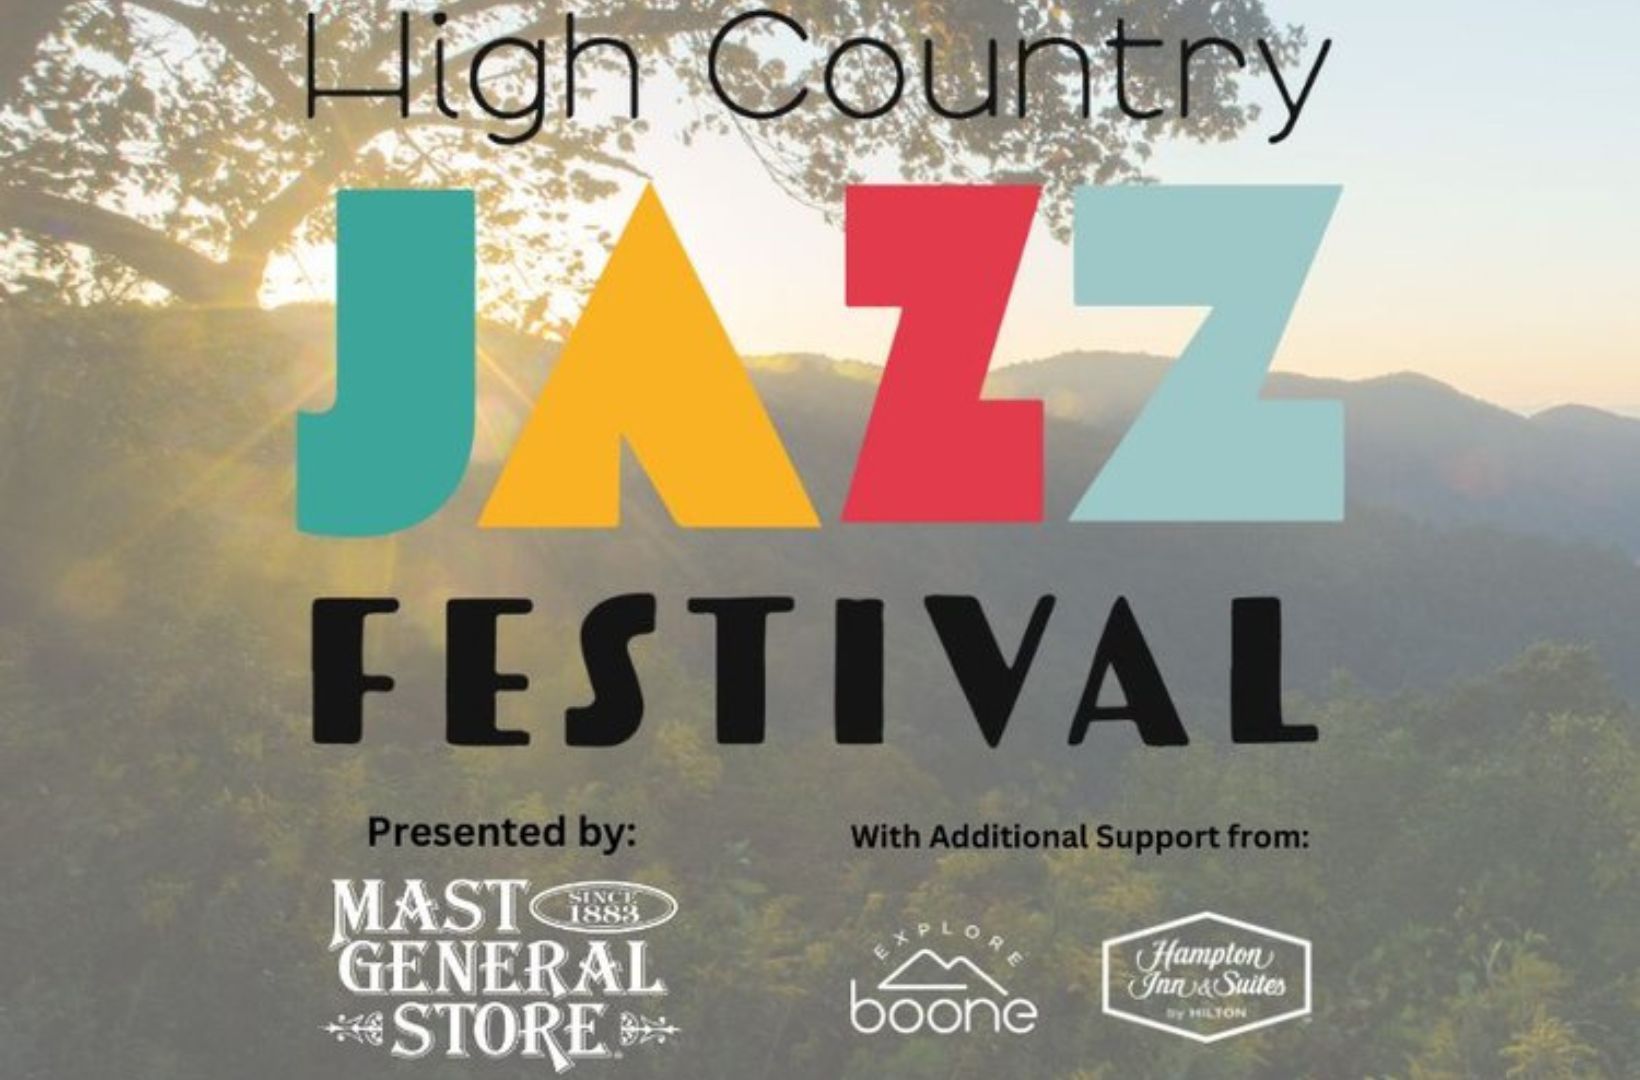 High Country Jazz Festival: The Jazz Swing Feel at BRAHM